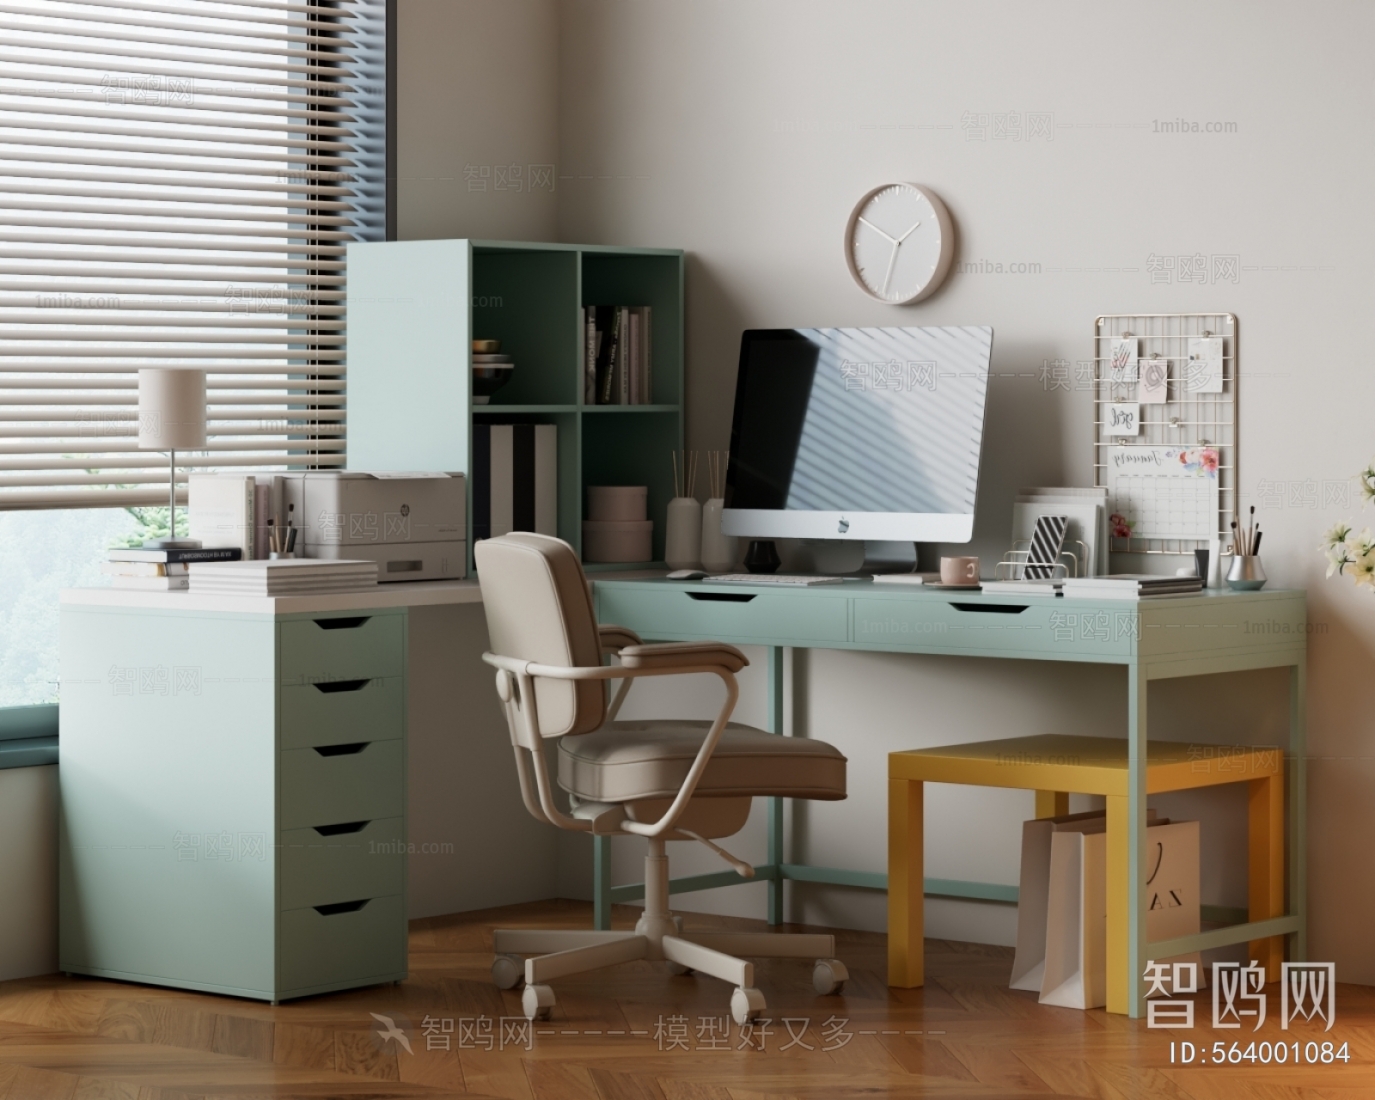 Nordic Style Computer Desk And Chair